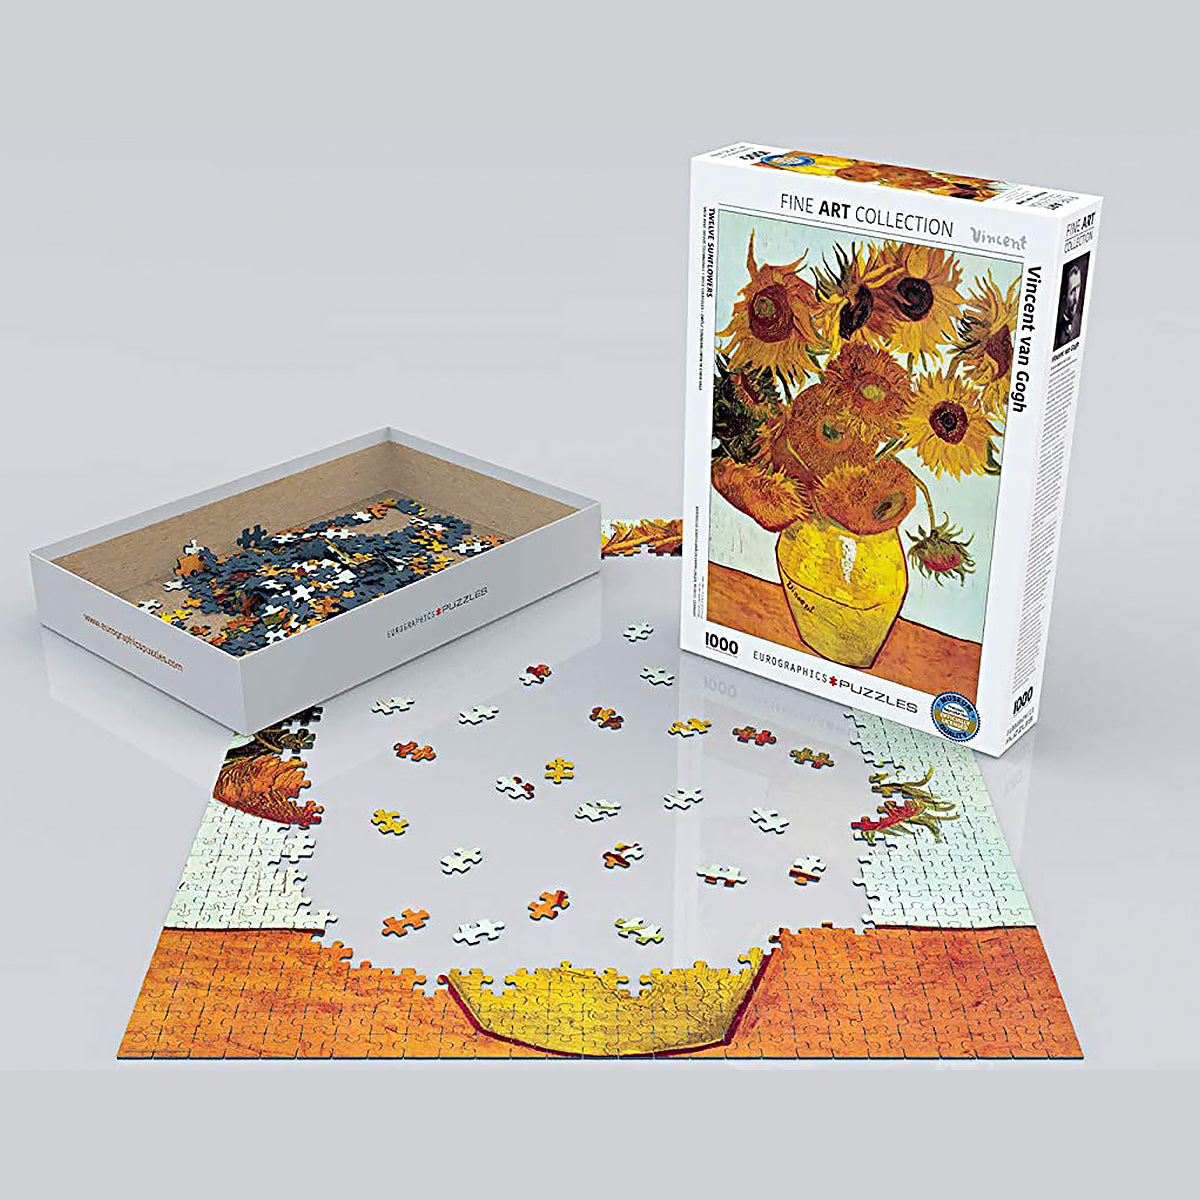 Eurographics Vincent Van Gogh Vase with Twelve Sunflowers Jigsaw Puzzle - Made from Recycled Board and Printed with Vegetable-Based Ink